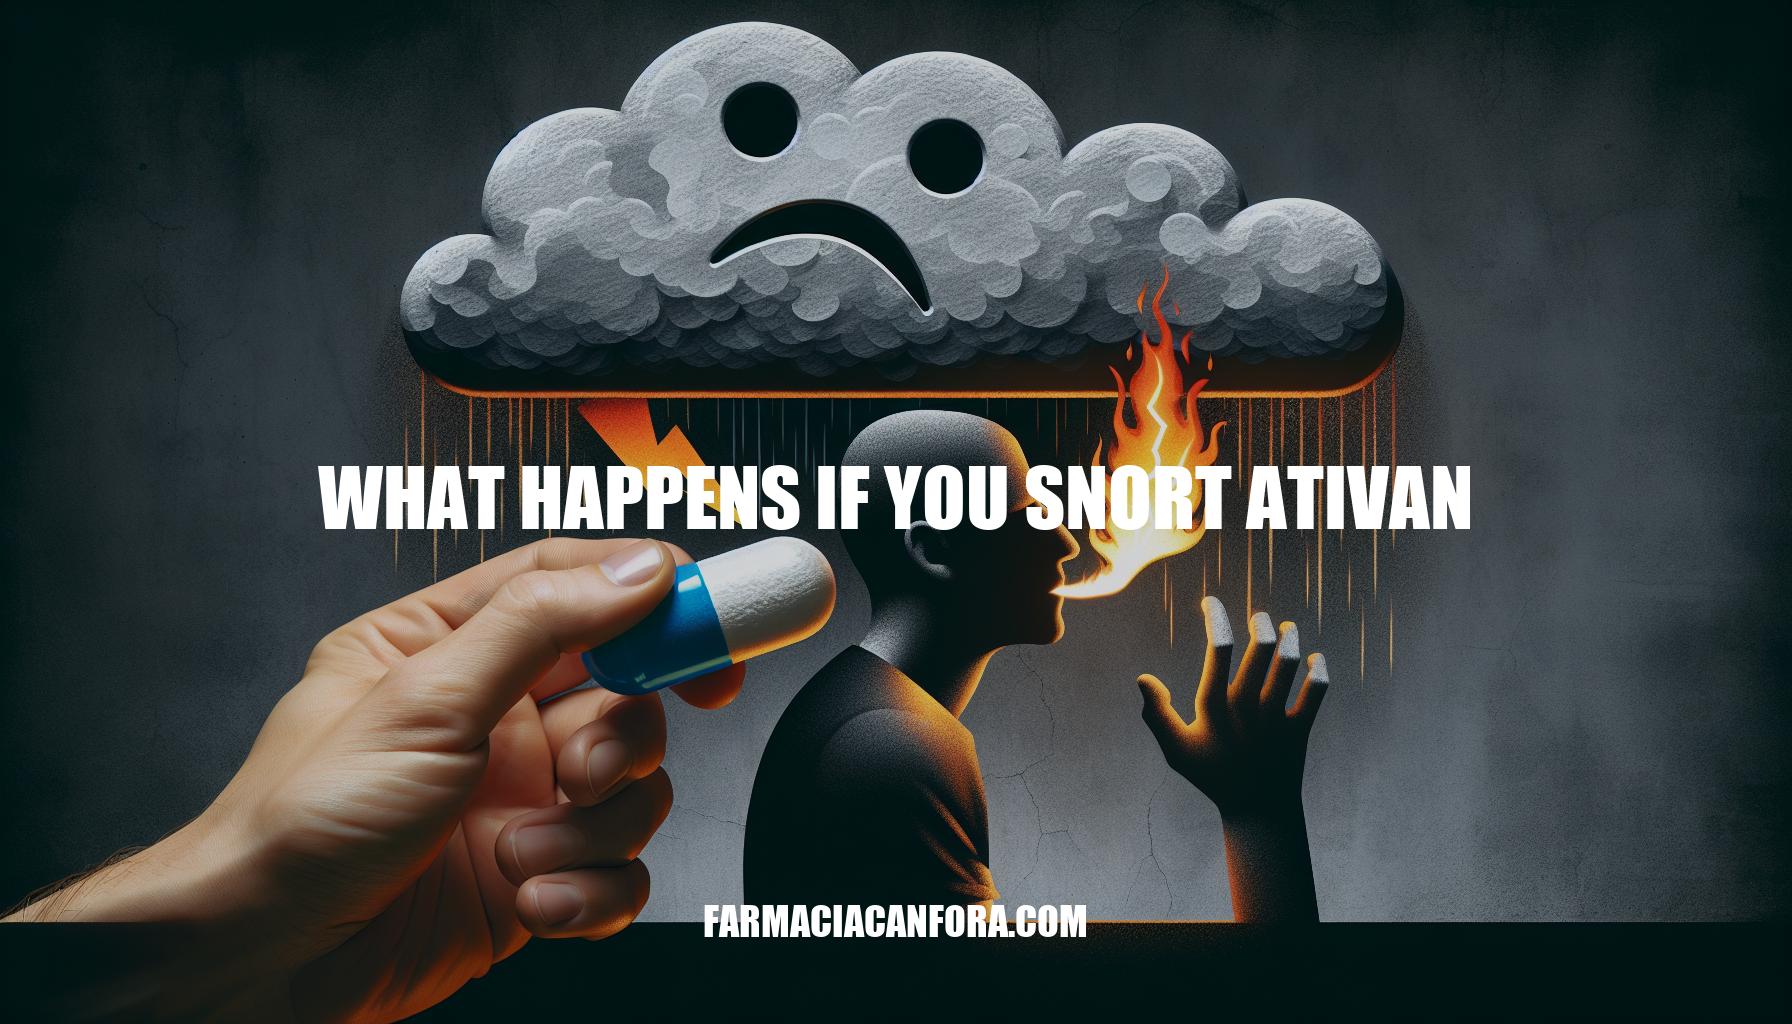 What Happens If You Snort Ativan: Dangers and Effects